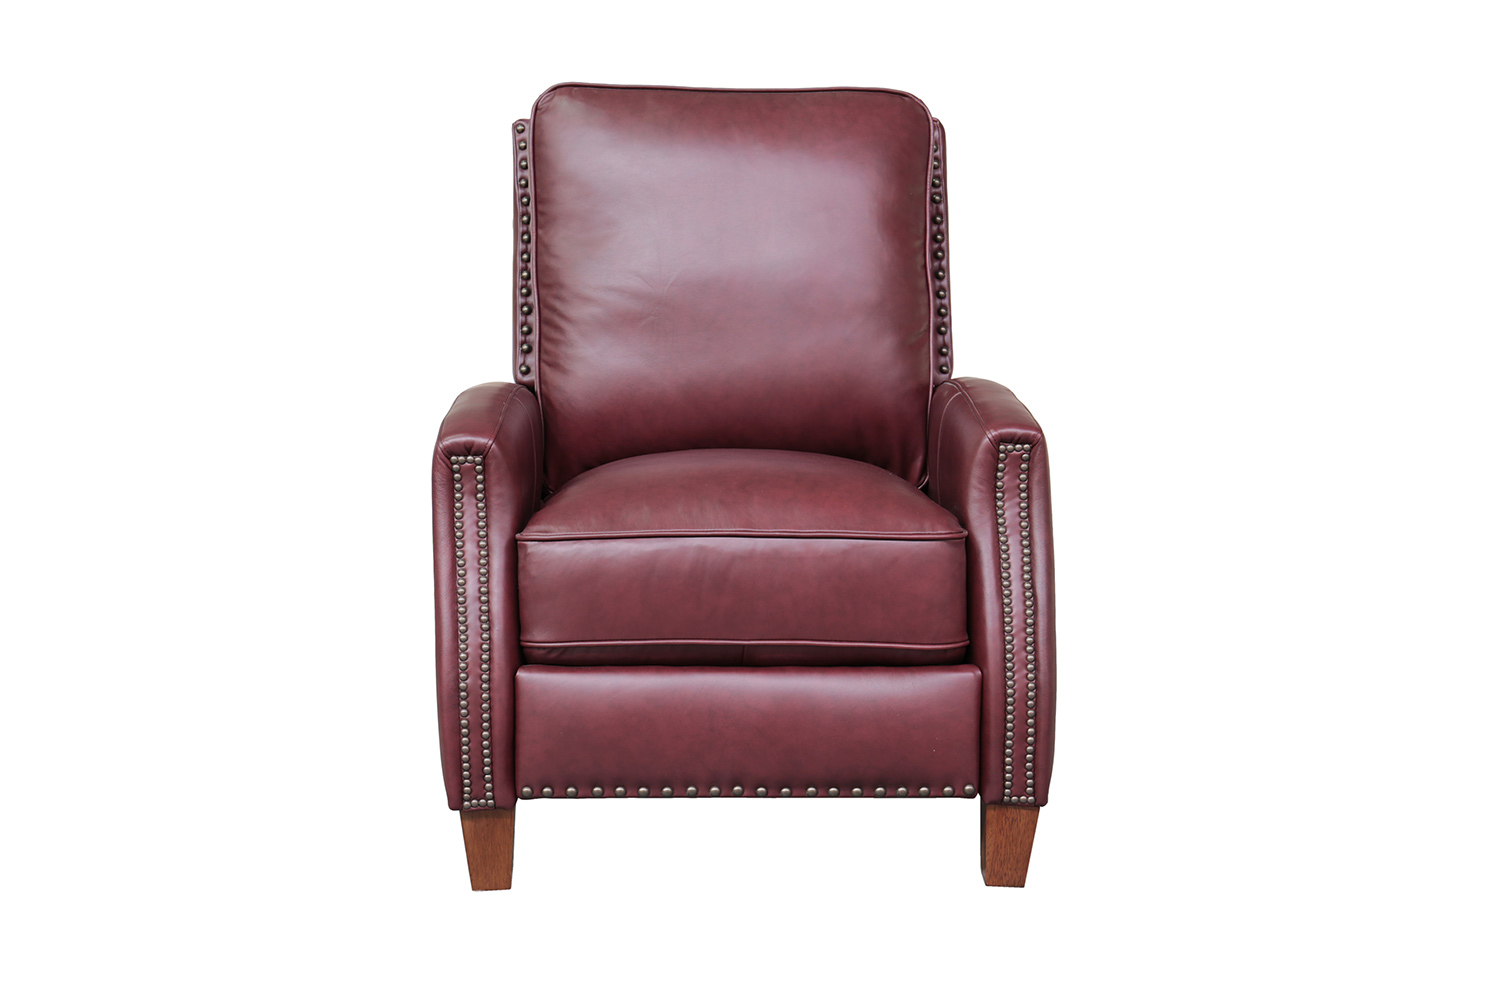 Barcalounger Melrose Recliner Chair - Shoreham Wine/All Leather